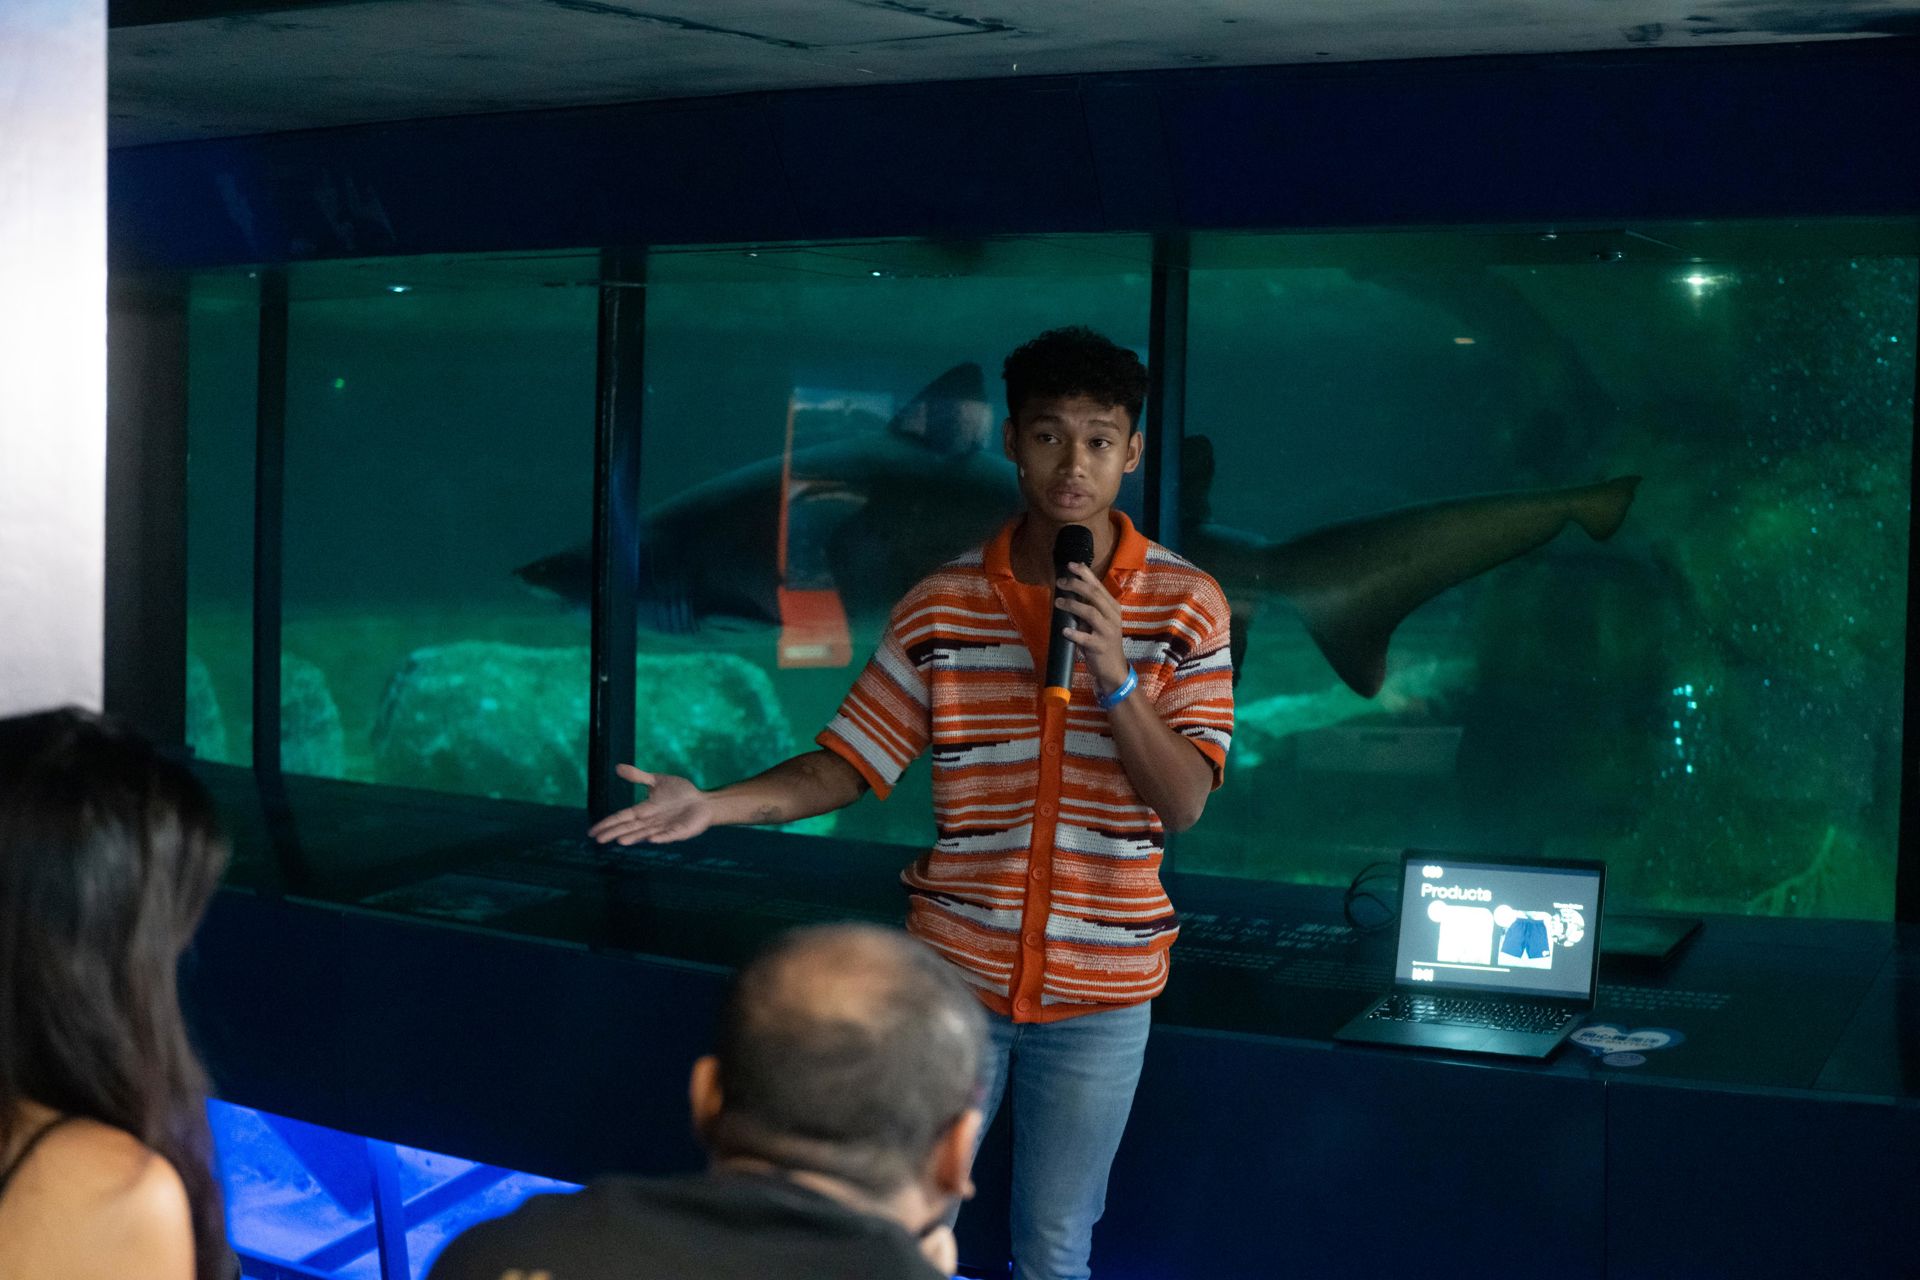 Photo shows a "Shark Tank" style pitch competition held during the Explore the Innovation Ocean event to empower and showcase innovative ideas from the younger generation.